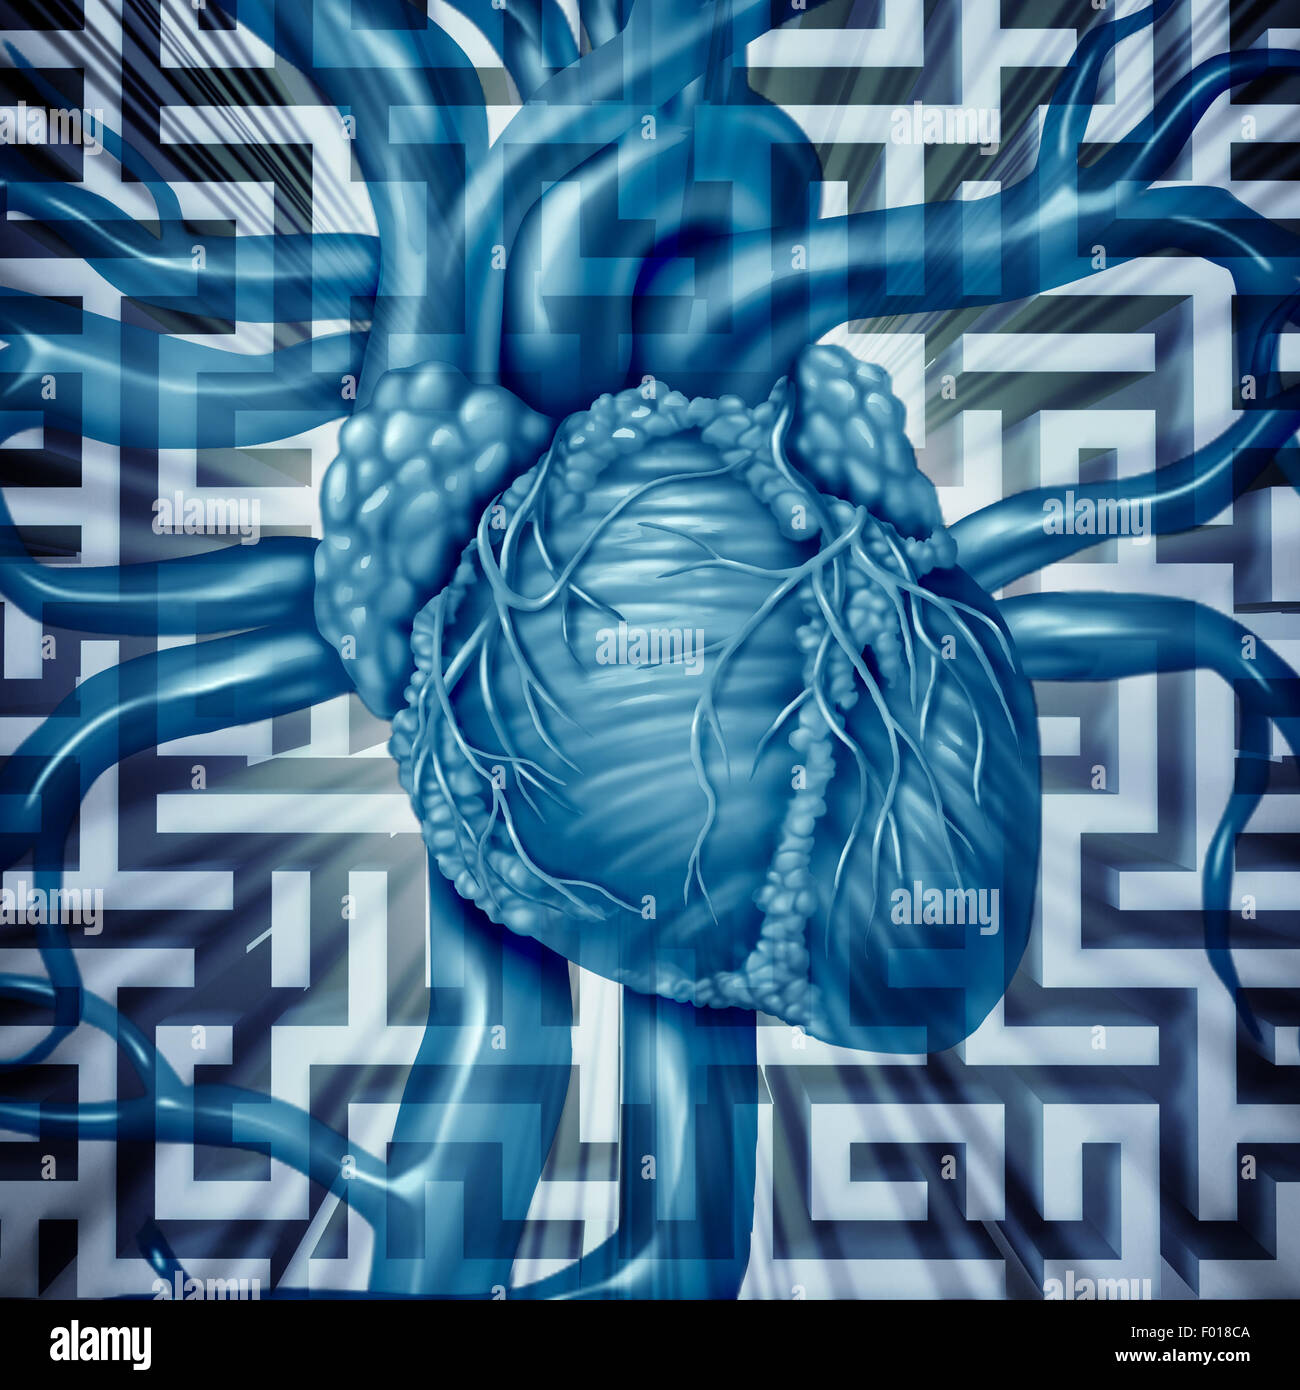 Heart challenge human cardiovascular problems concept on a maze or labyrinth as cardiac dangers of an unhealthy organ risk for medical blood circulation resulting in a heart attack. Stock Photo